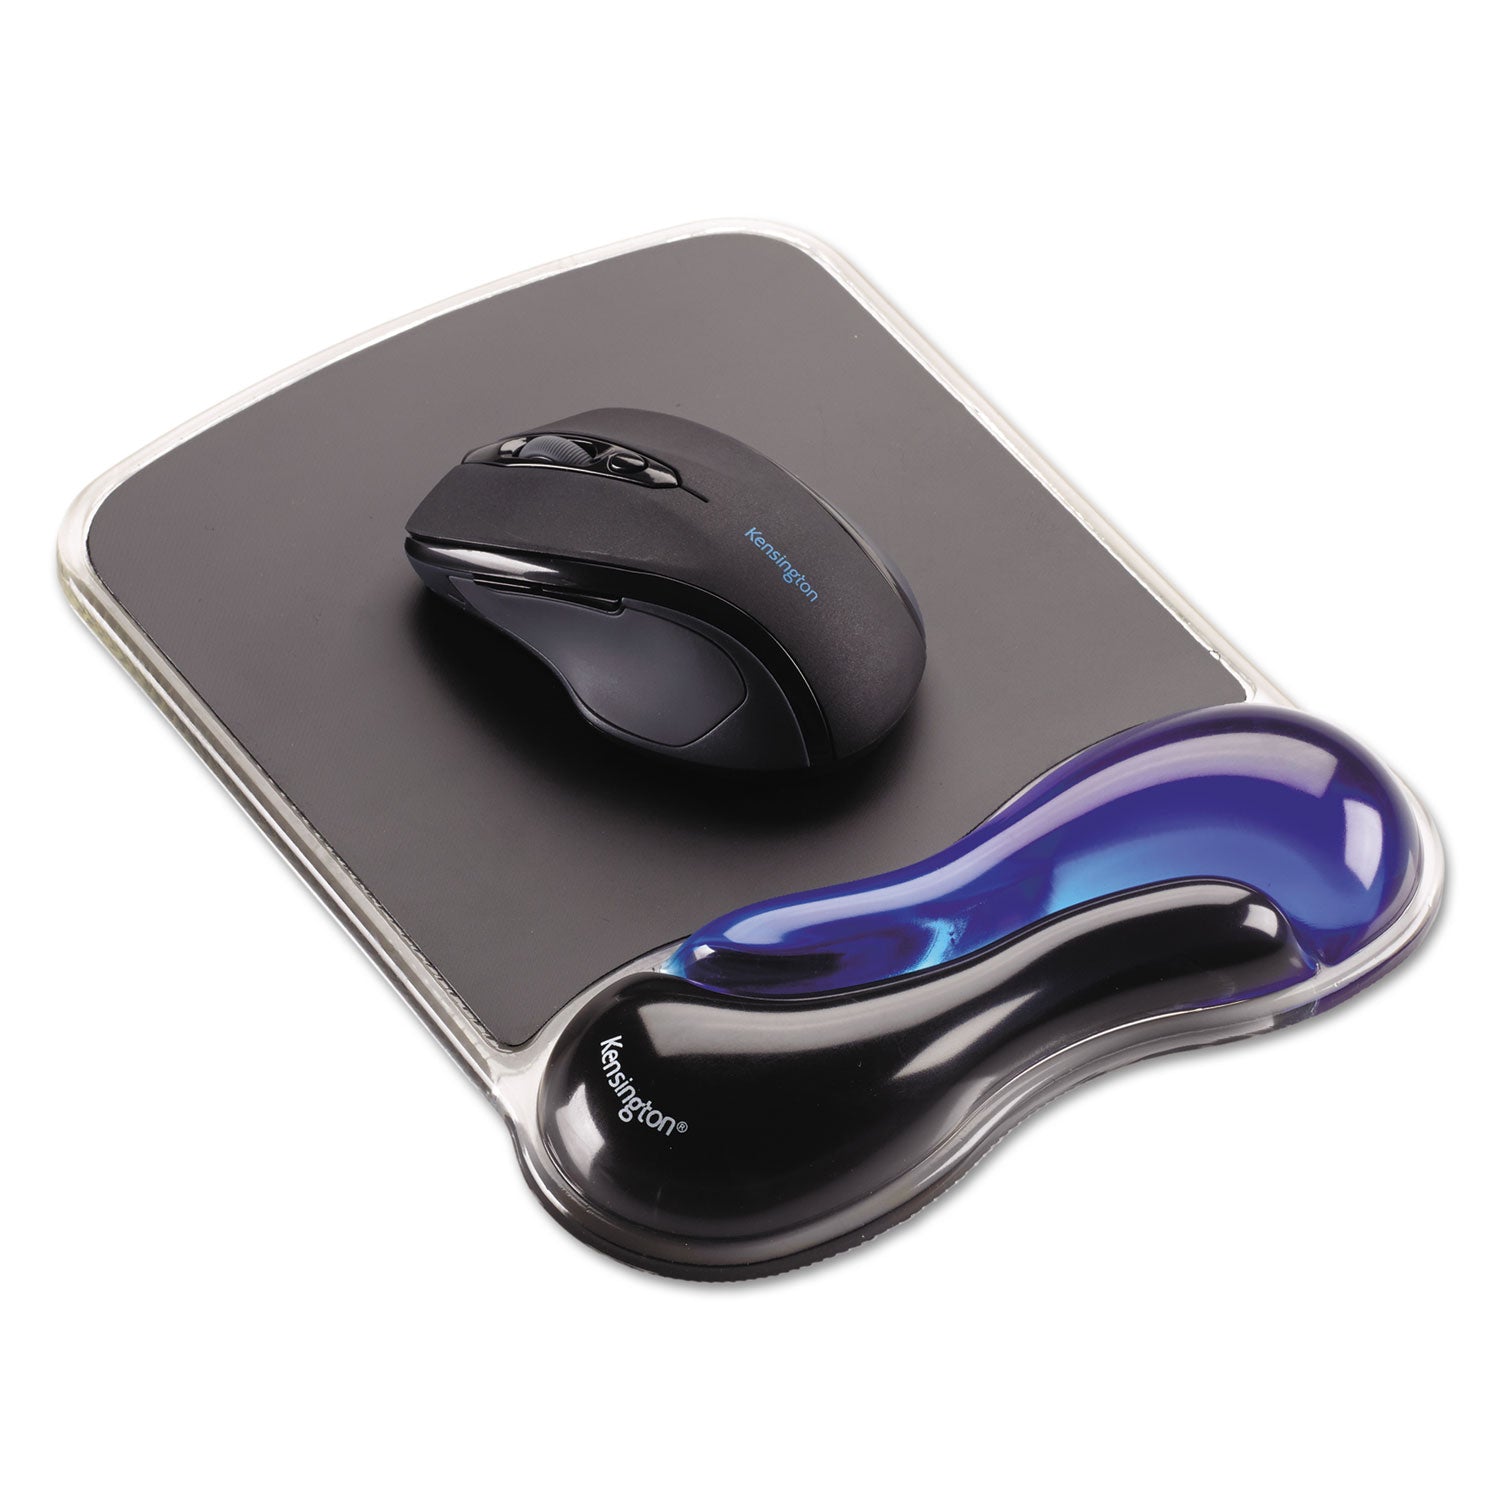 duo-gel-wave-mouse-pad-with-wrist-rest-937-x-13-blue_kmw62401 - 2